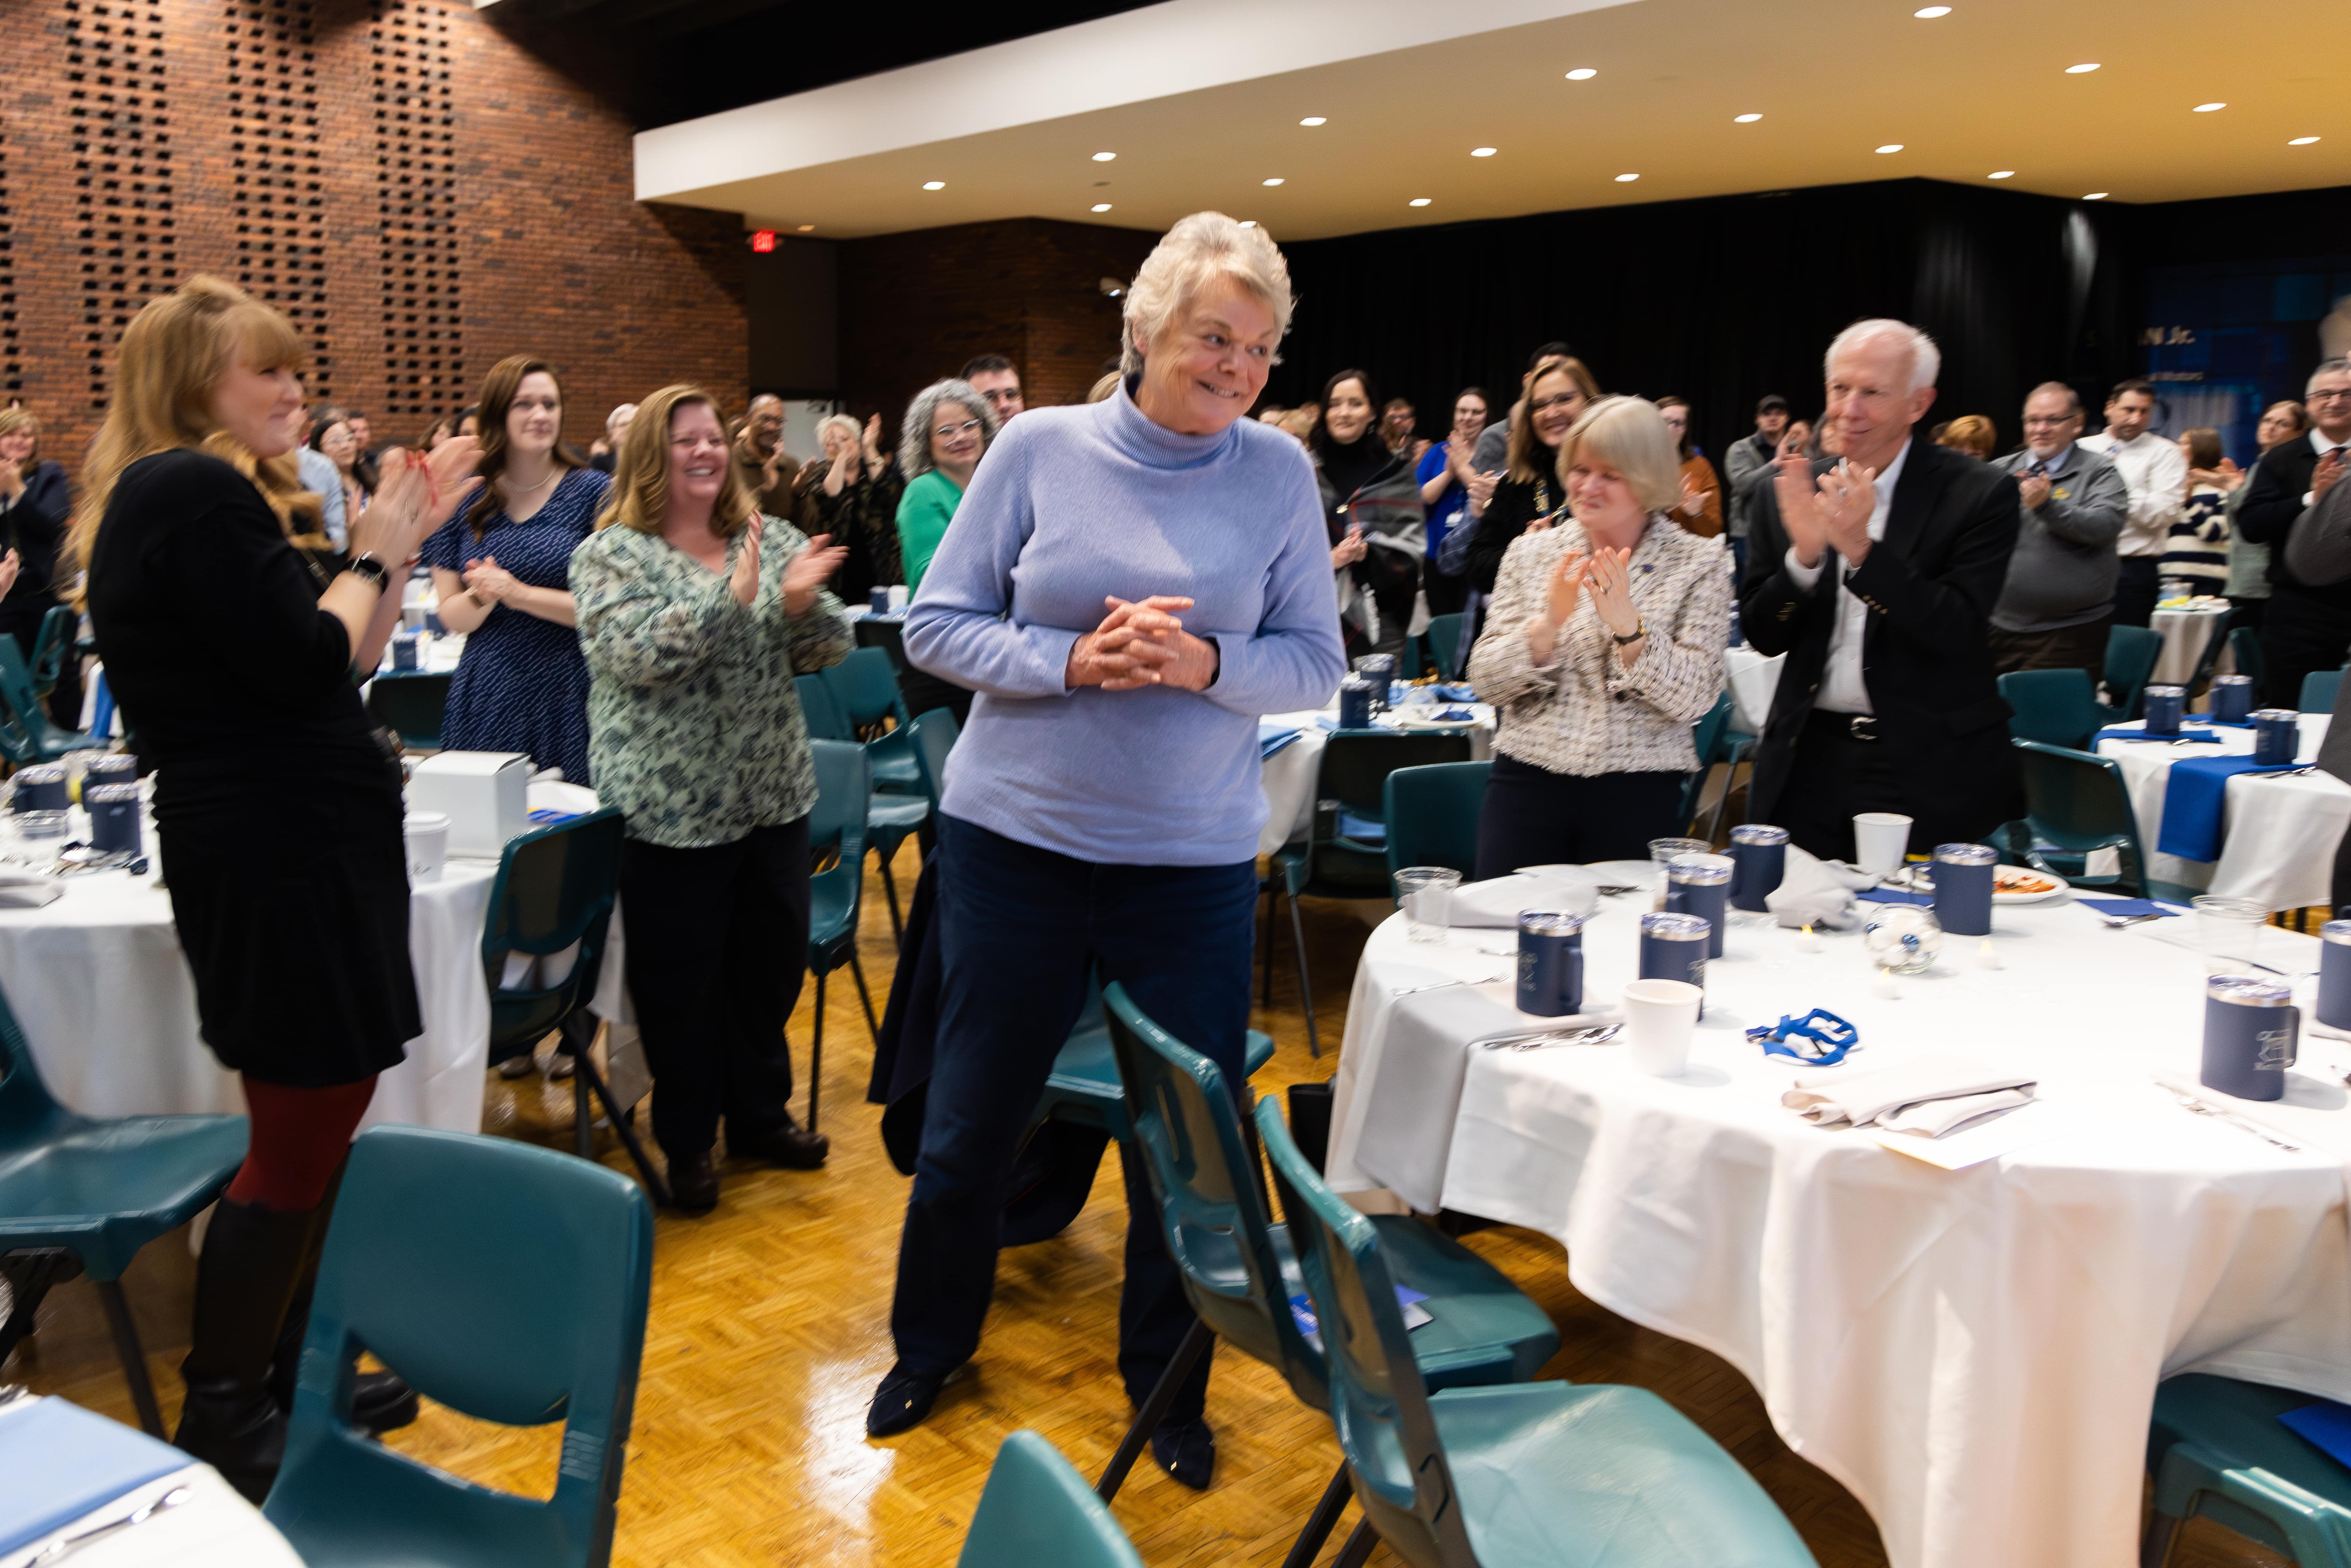 Betsy Homsher stands and thanks her colleagues for their praise at Kettering University's 2023 Celebration of Excellence.